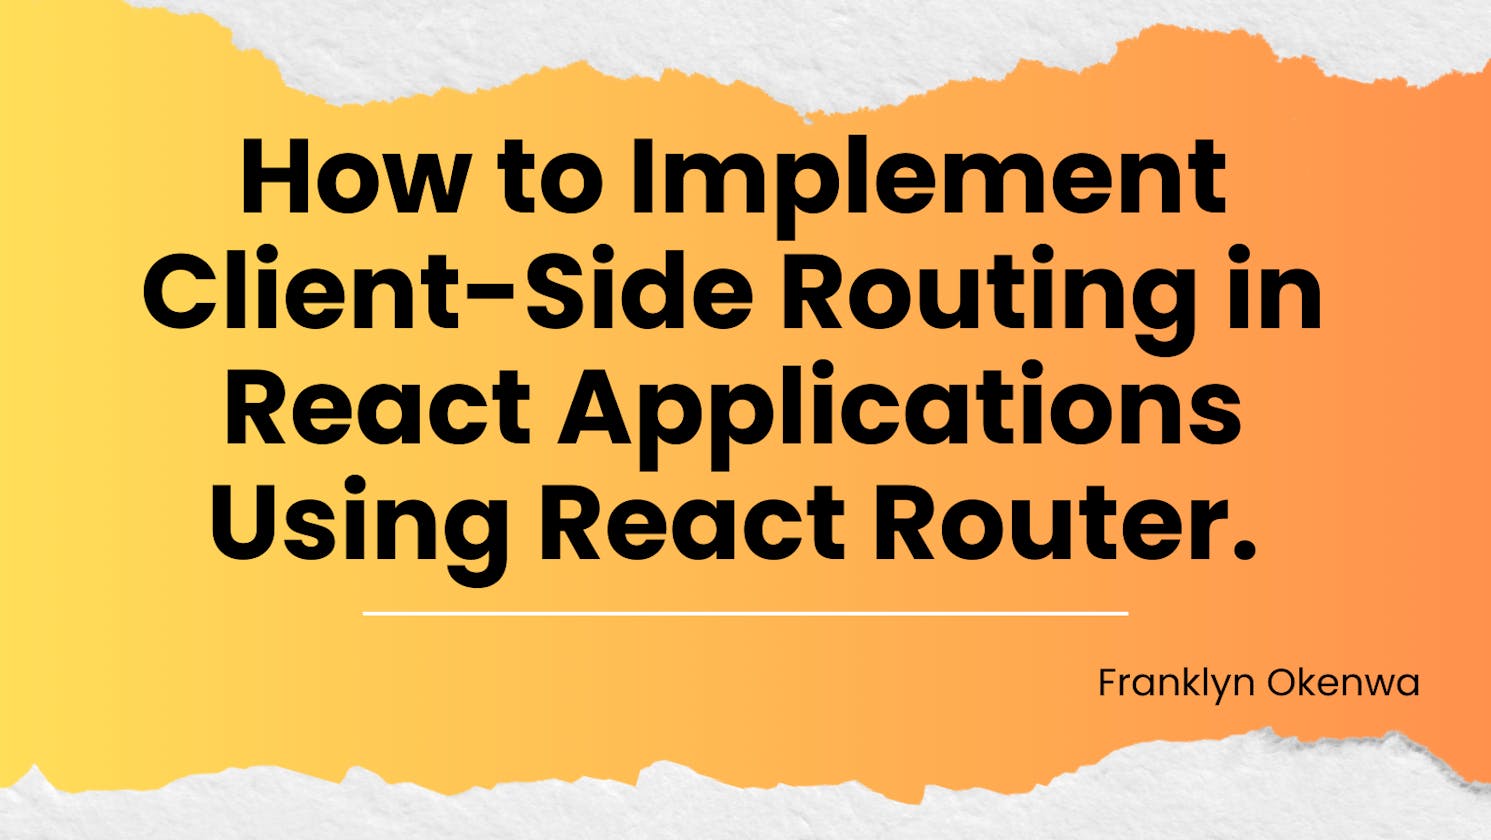 How to Implement Client-Side Routing in React Applications Using React Router.